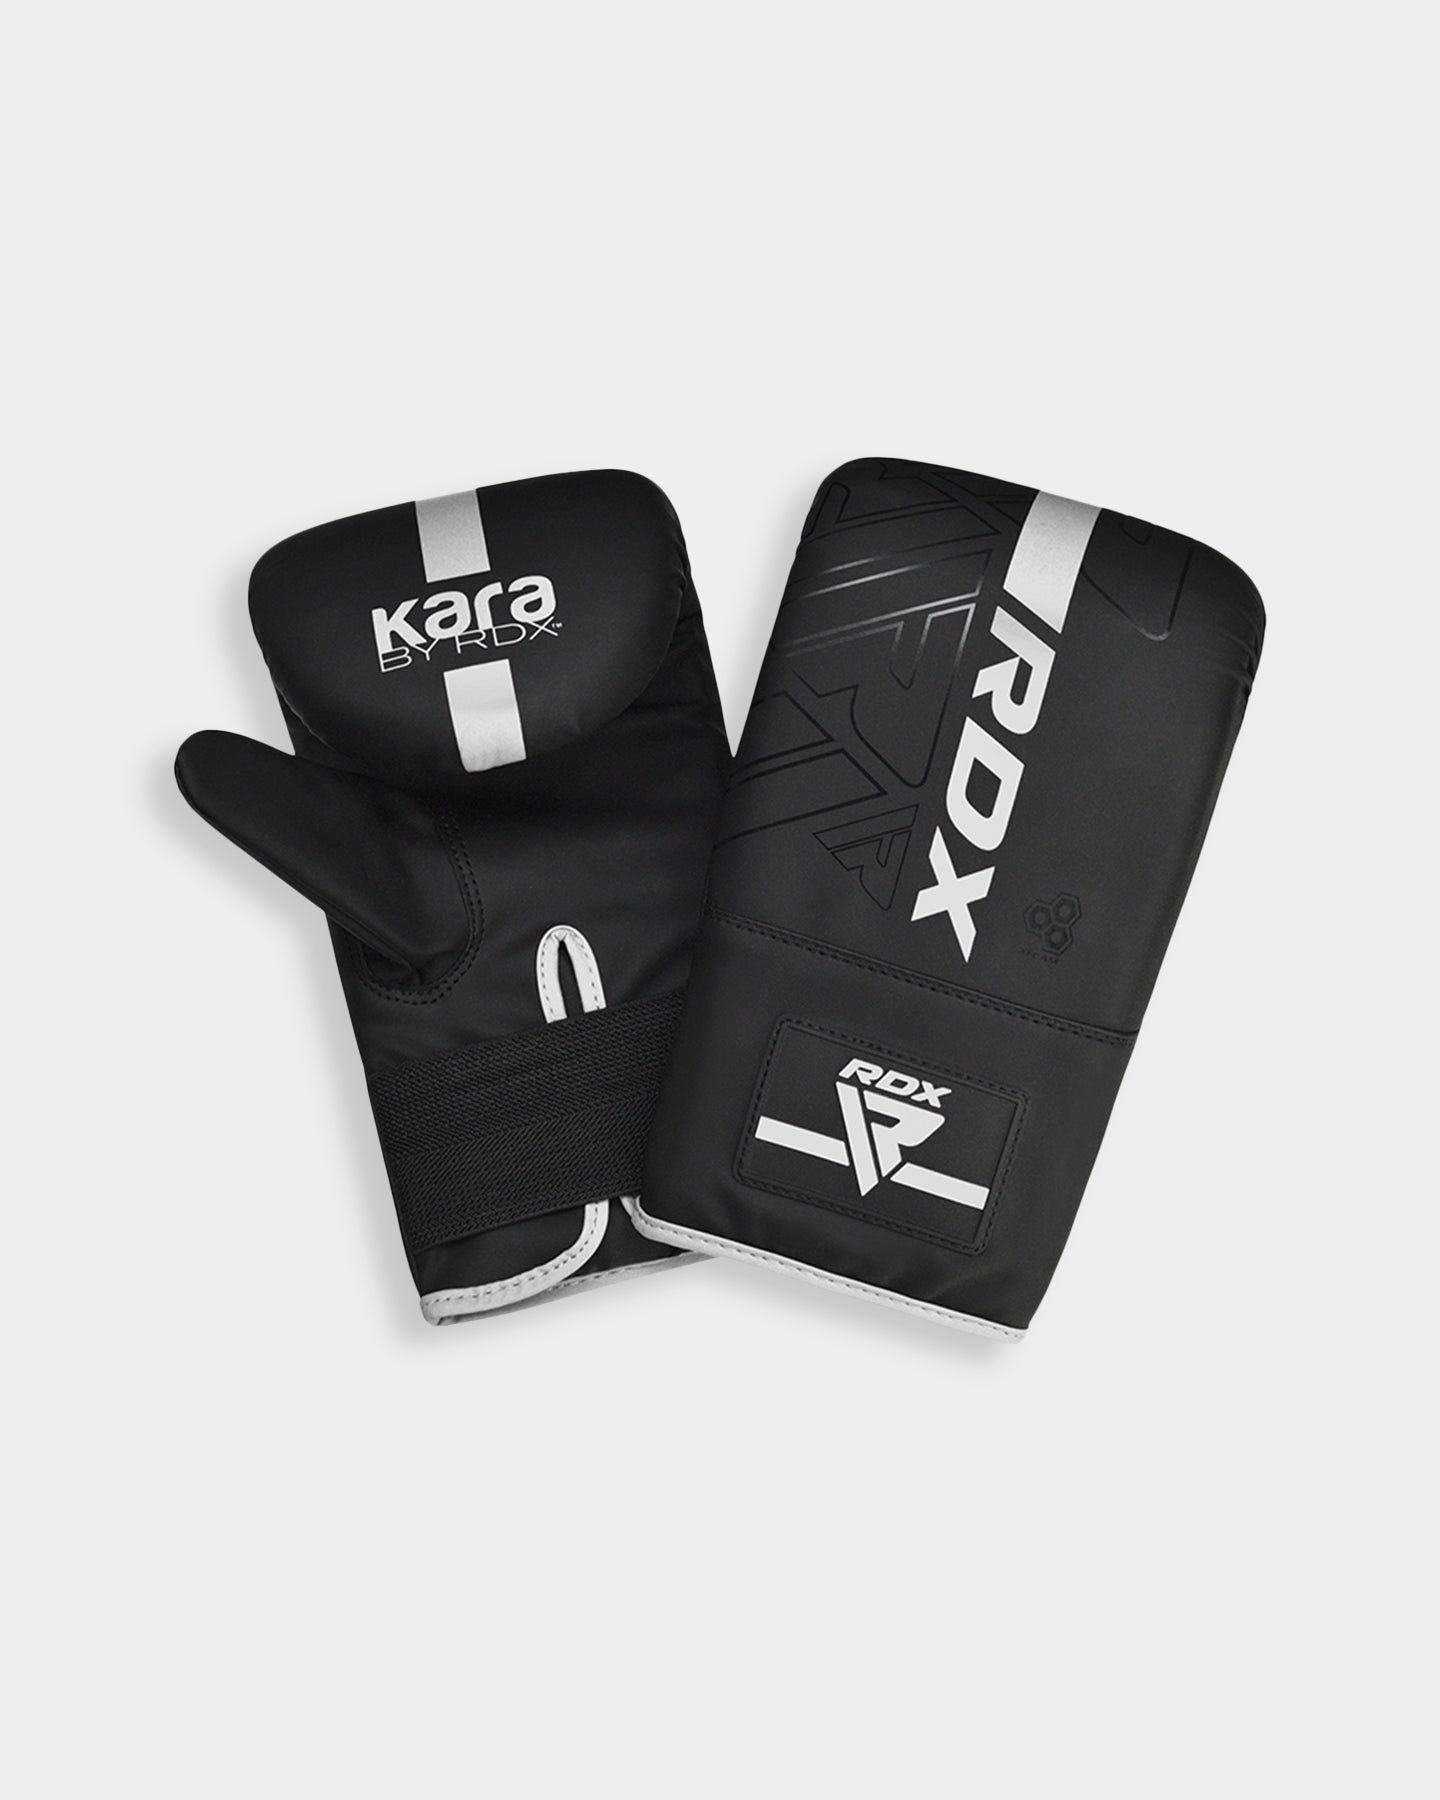 RDX Sports BOXING BAG MITTS F6, Standard Size, White A4